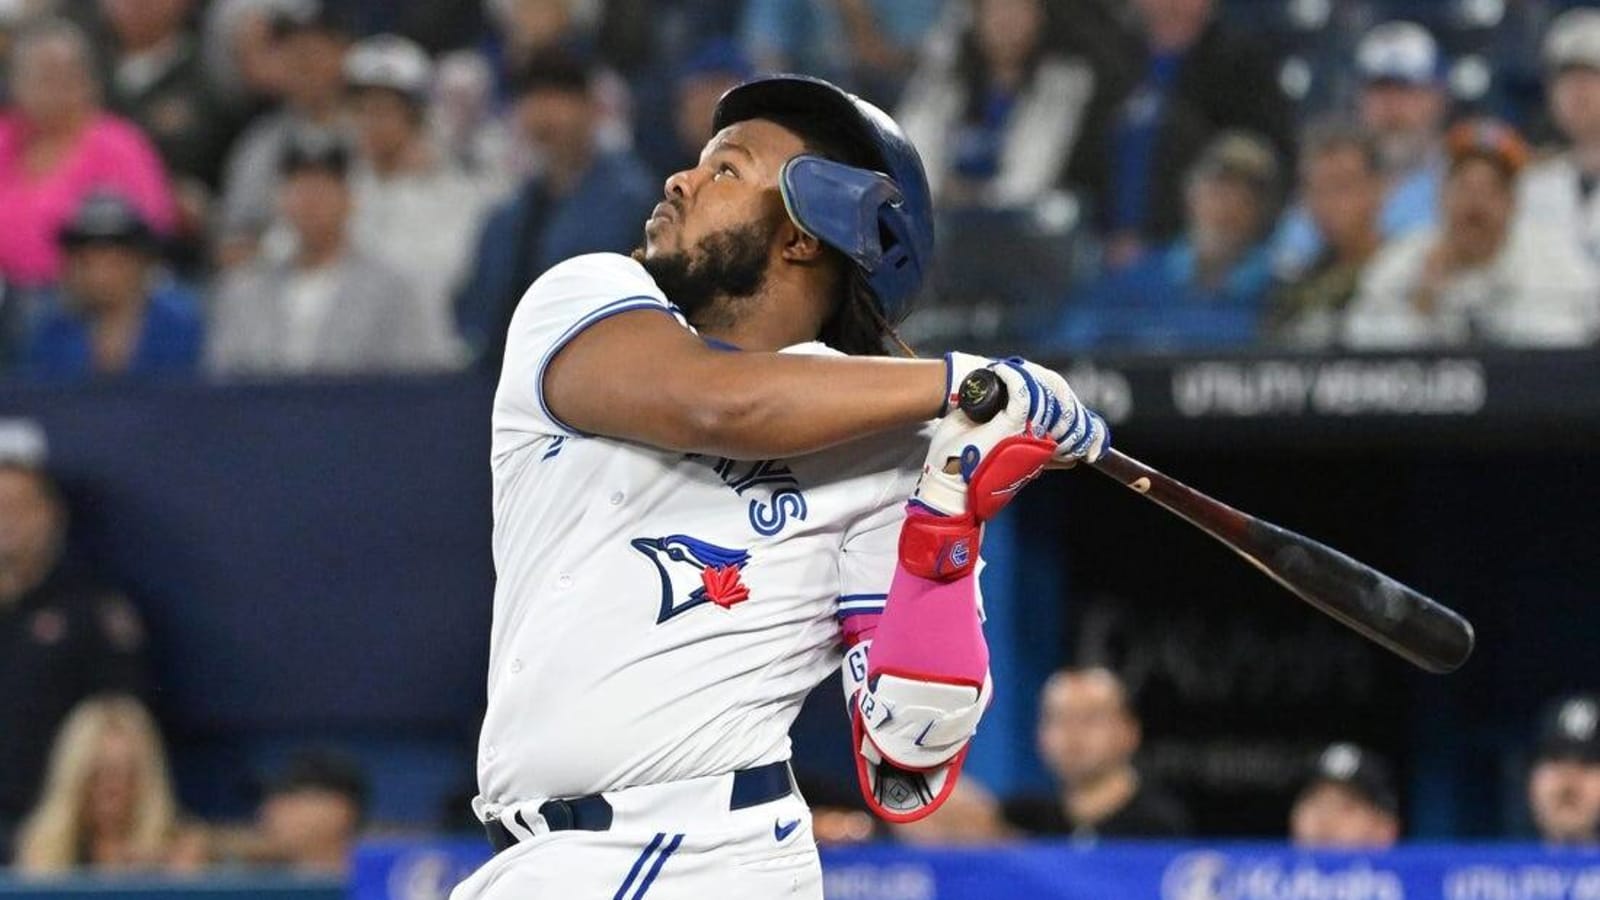 Jays need offense to return in finale vs. Yankees